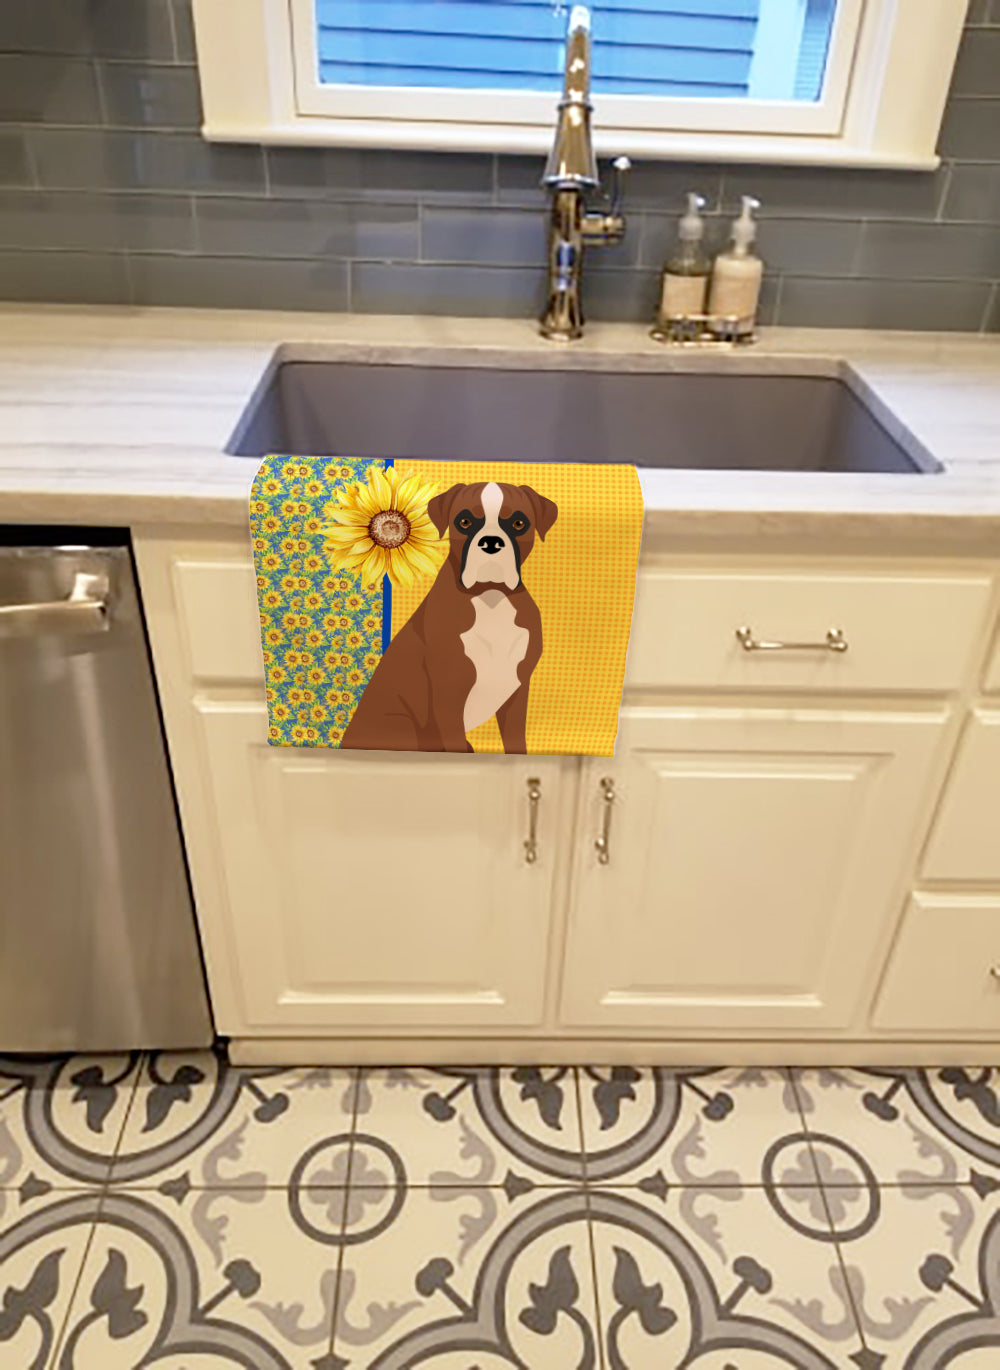 Buy this Summer Sunflowers Natural Eared Red Fawn Boxer Kitchen Towel